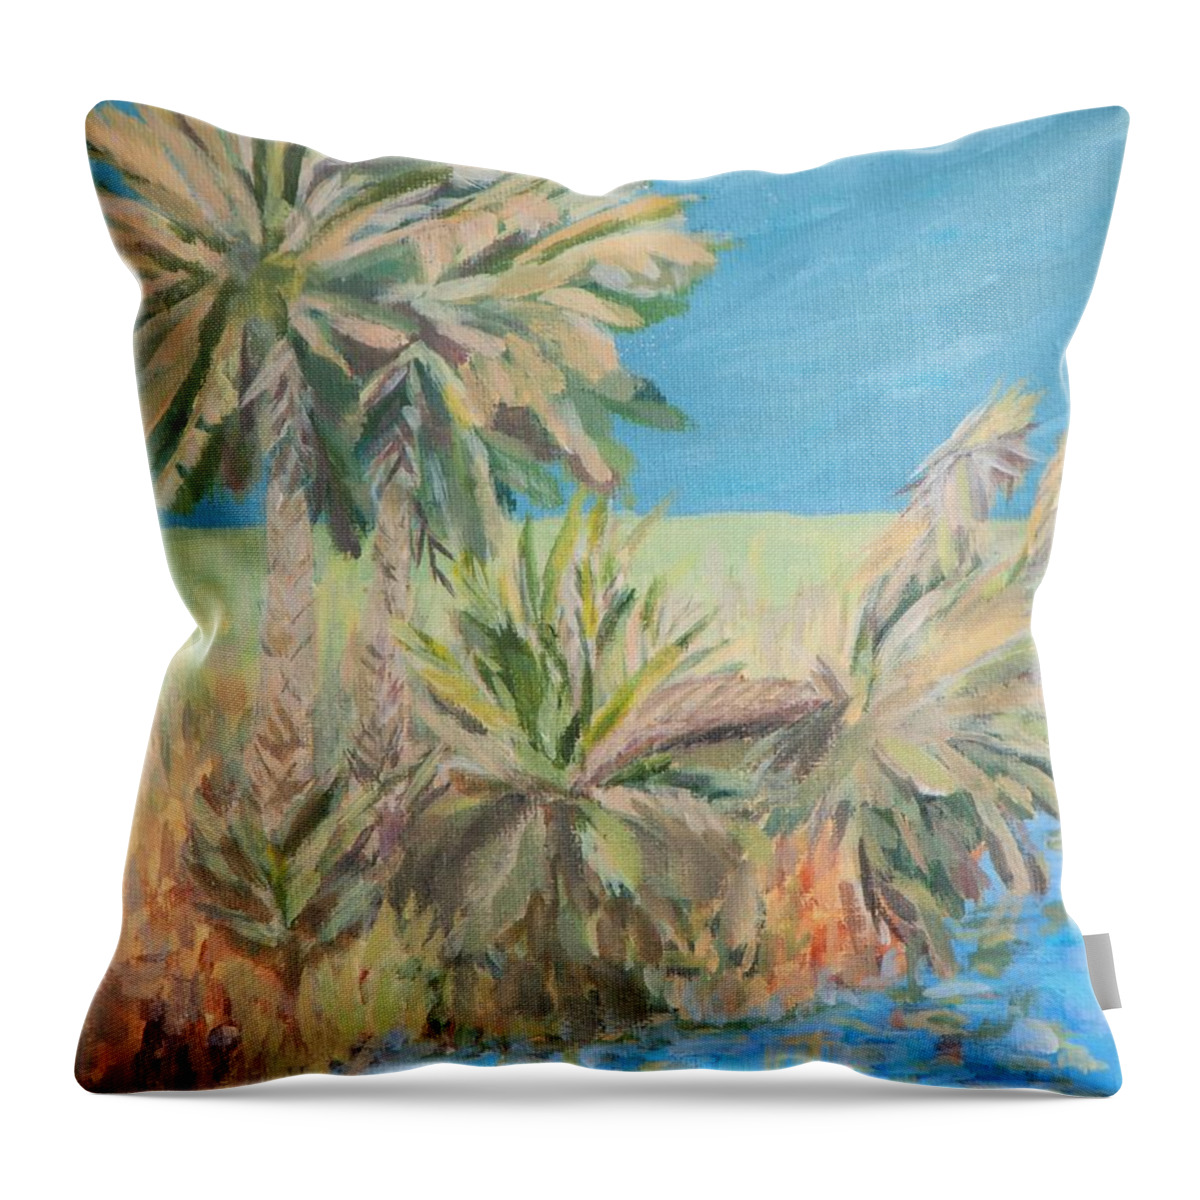 Landscape Throw Pillow featuring the painting Palmetto Edge by Deborah Smith